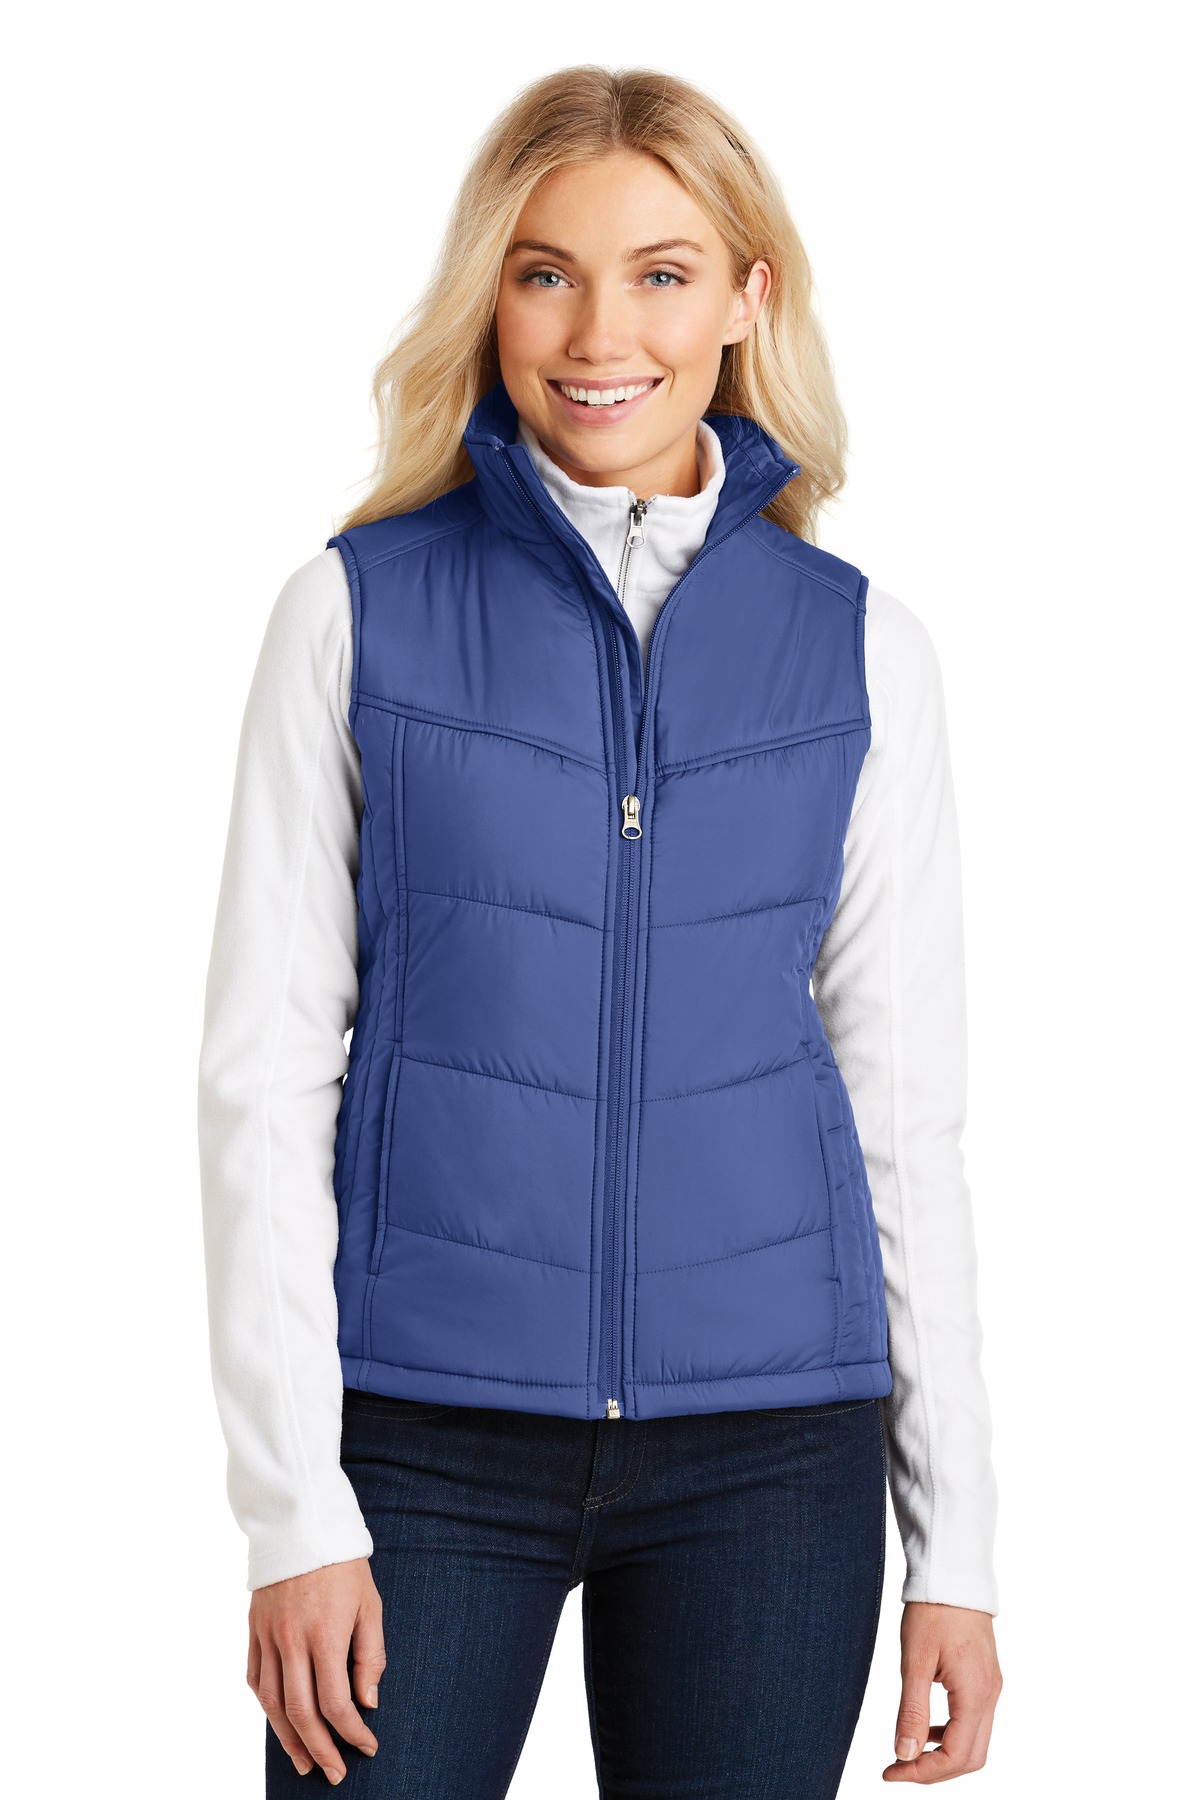 Port Authority Industrial Ladies Outerwear ® Ladies Puffy Vest.-Port Authority